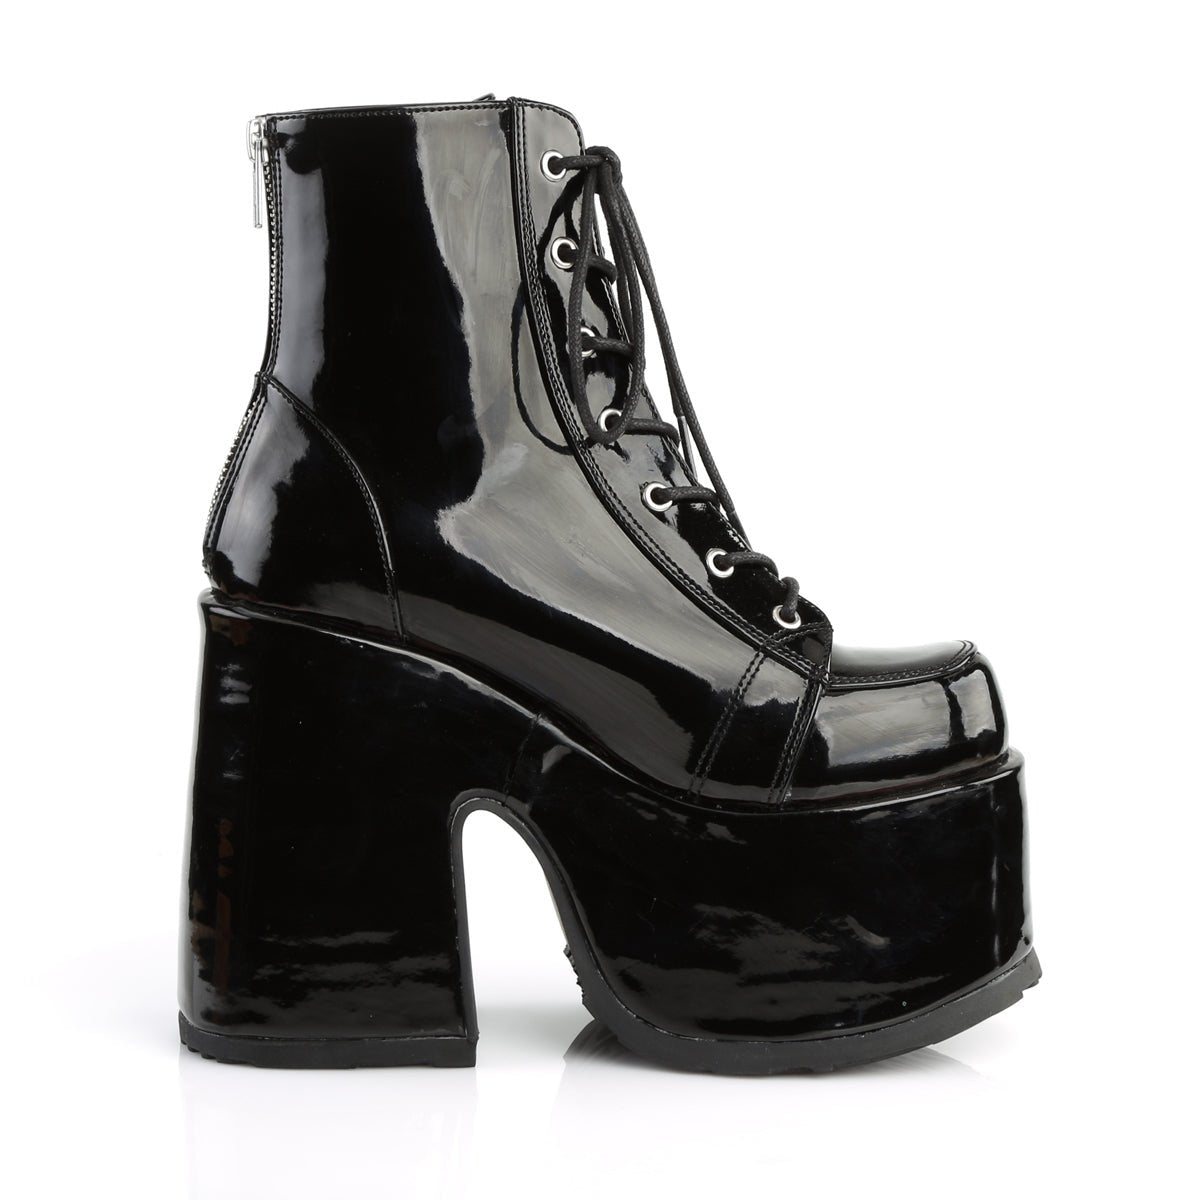 Too Fast | Demonia Camel 203 | Black Patent Leather Women's Ankle Boots